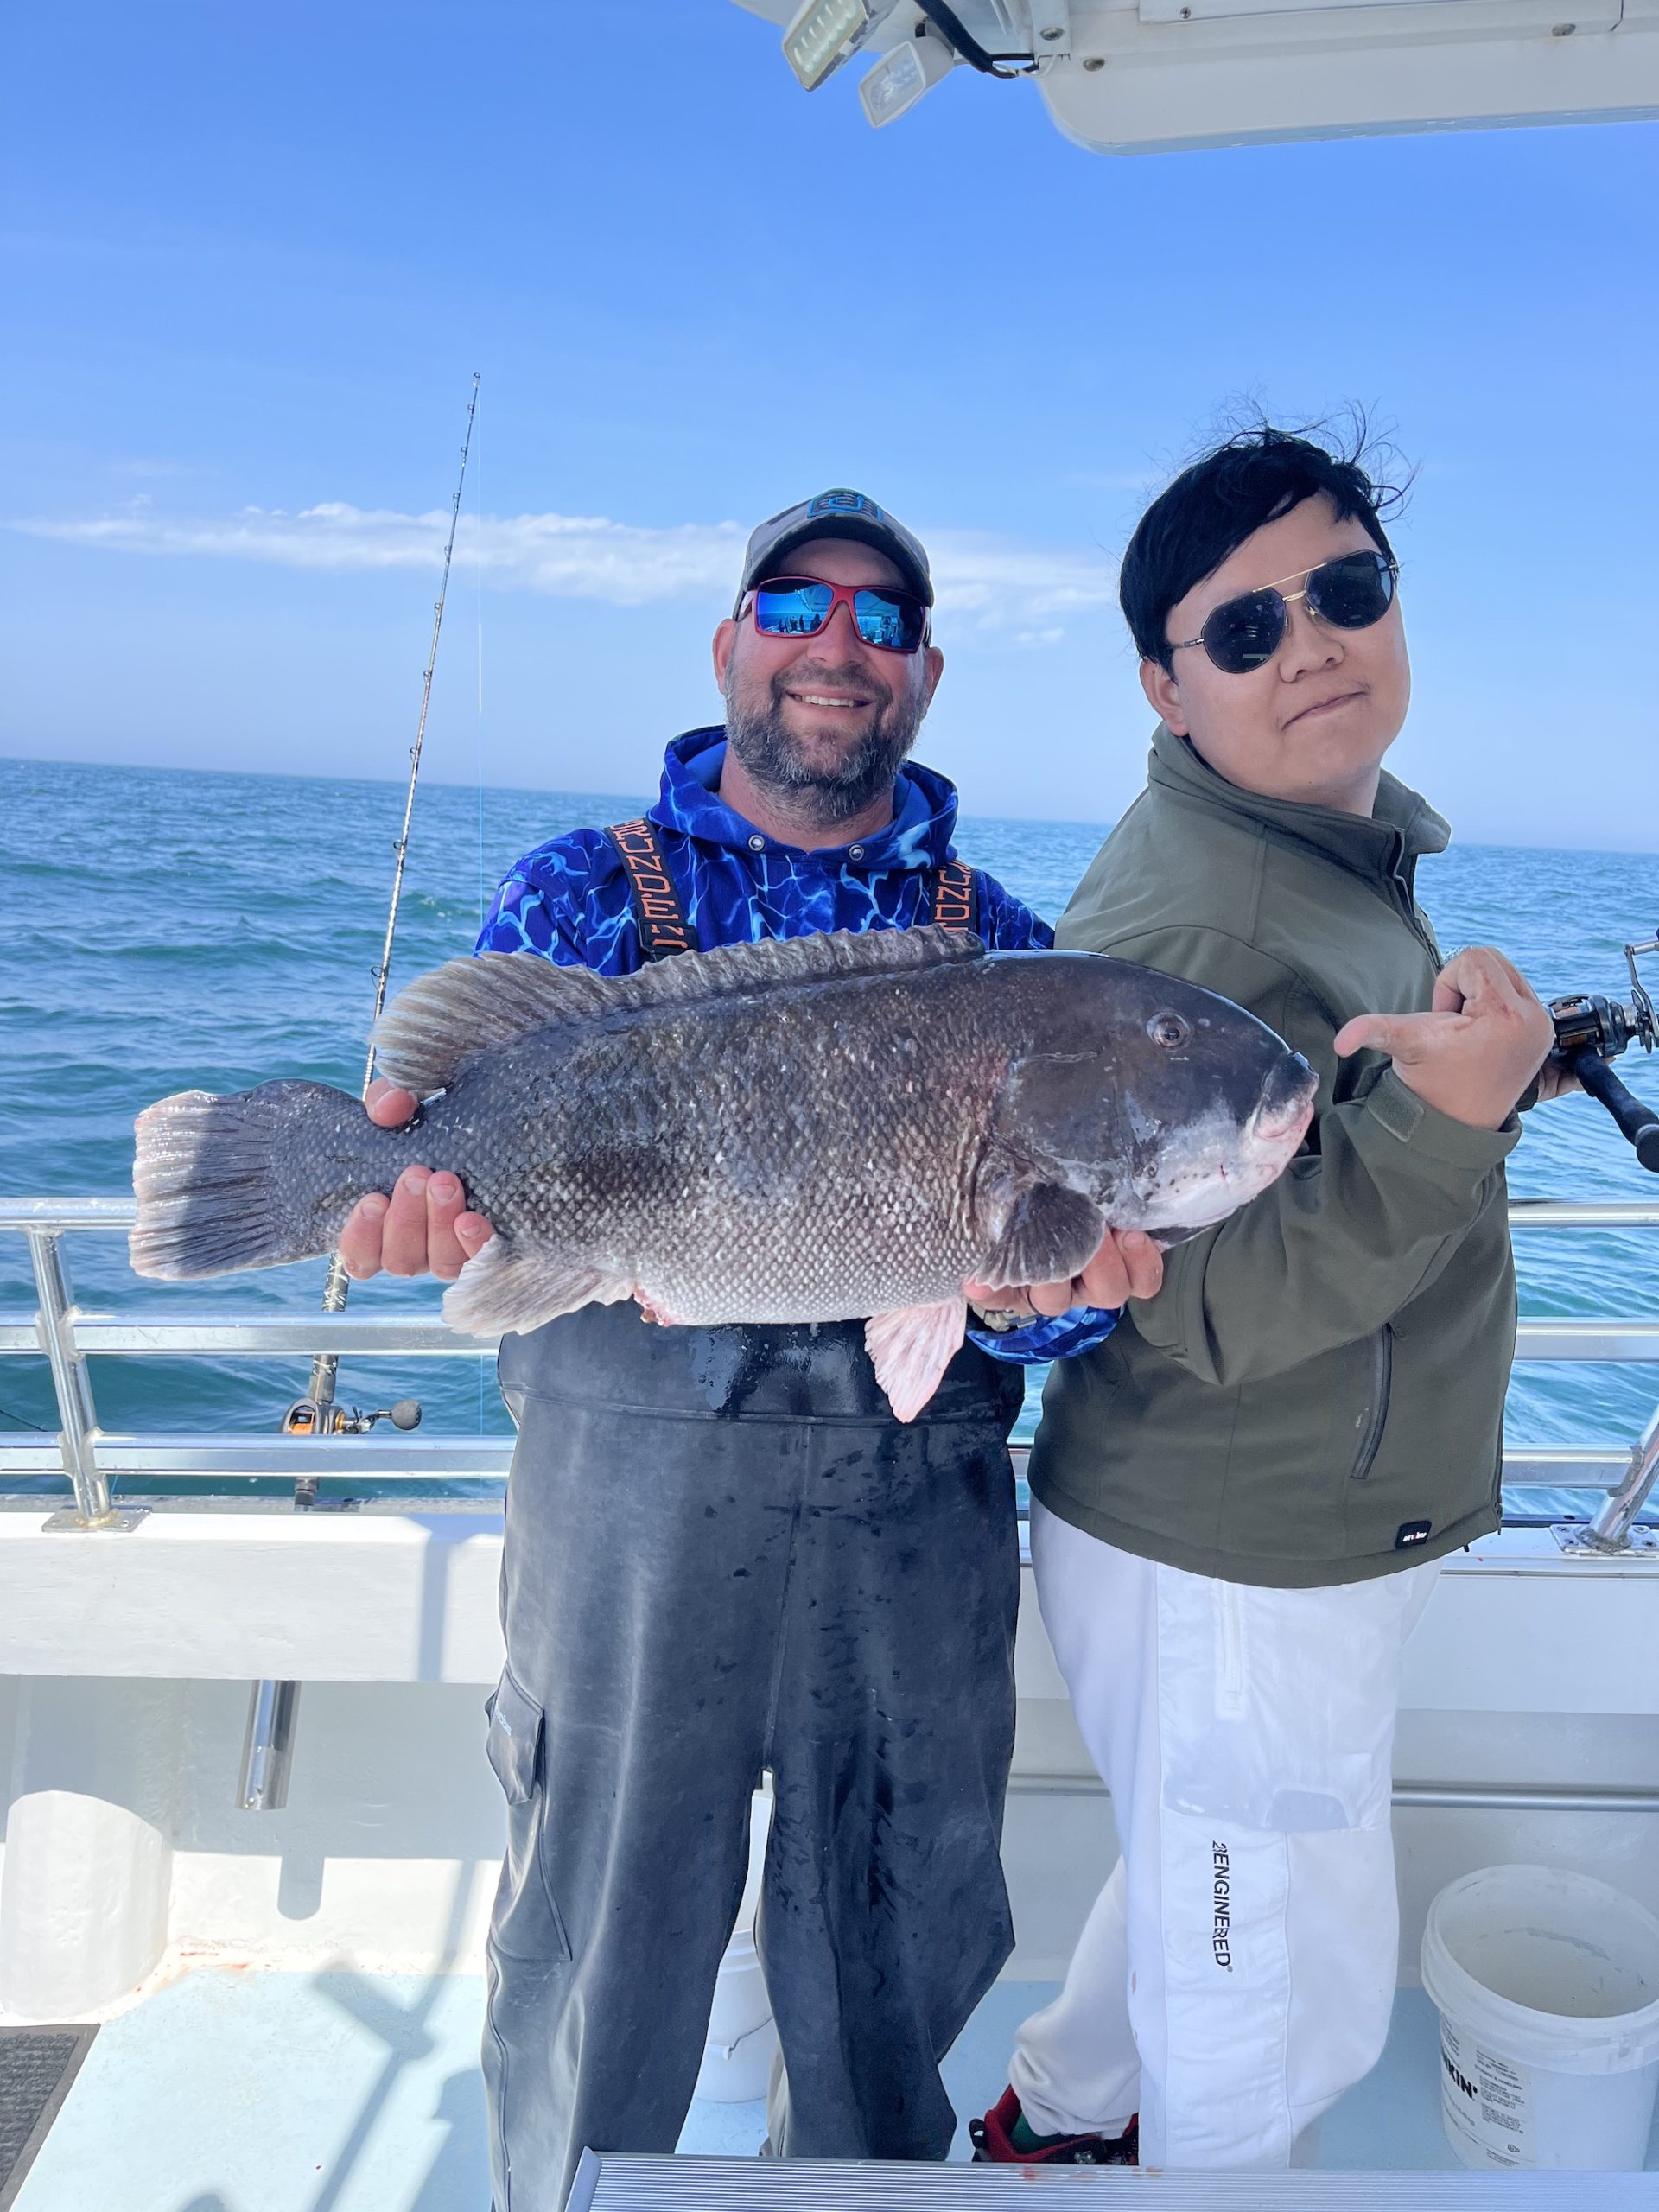 Big Rockfish, Double Digit Tautog and Limits of Flounder - Ocean